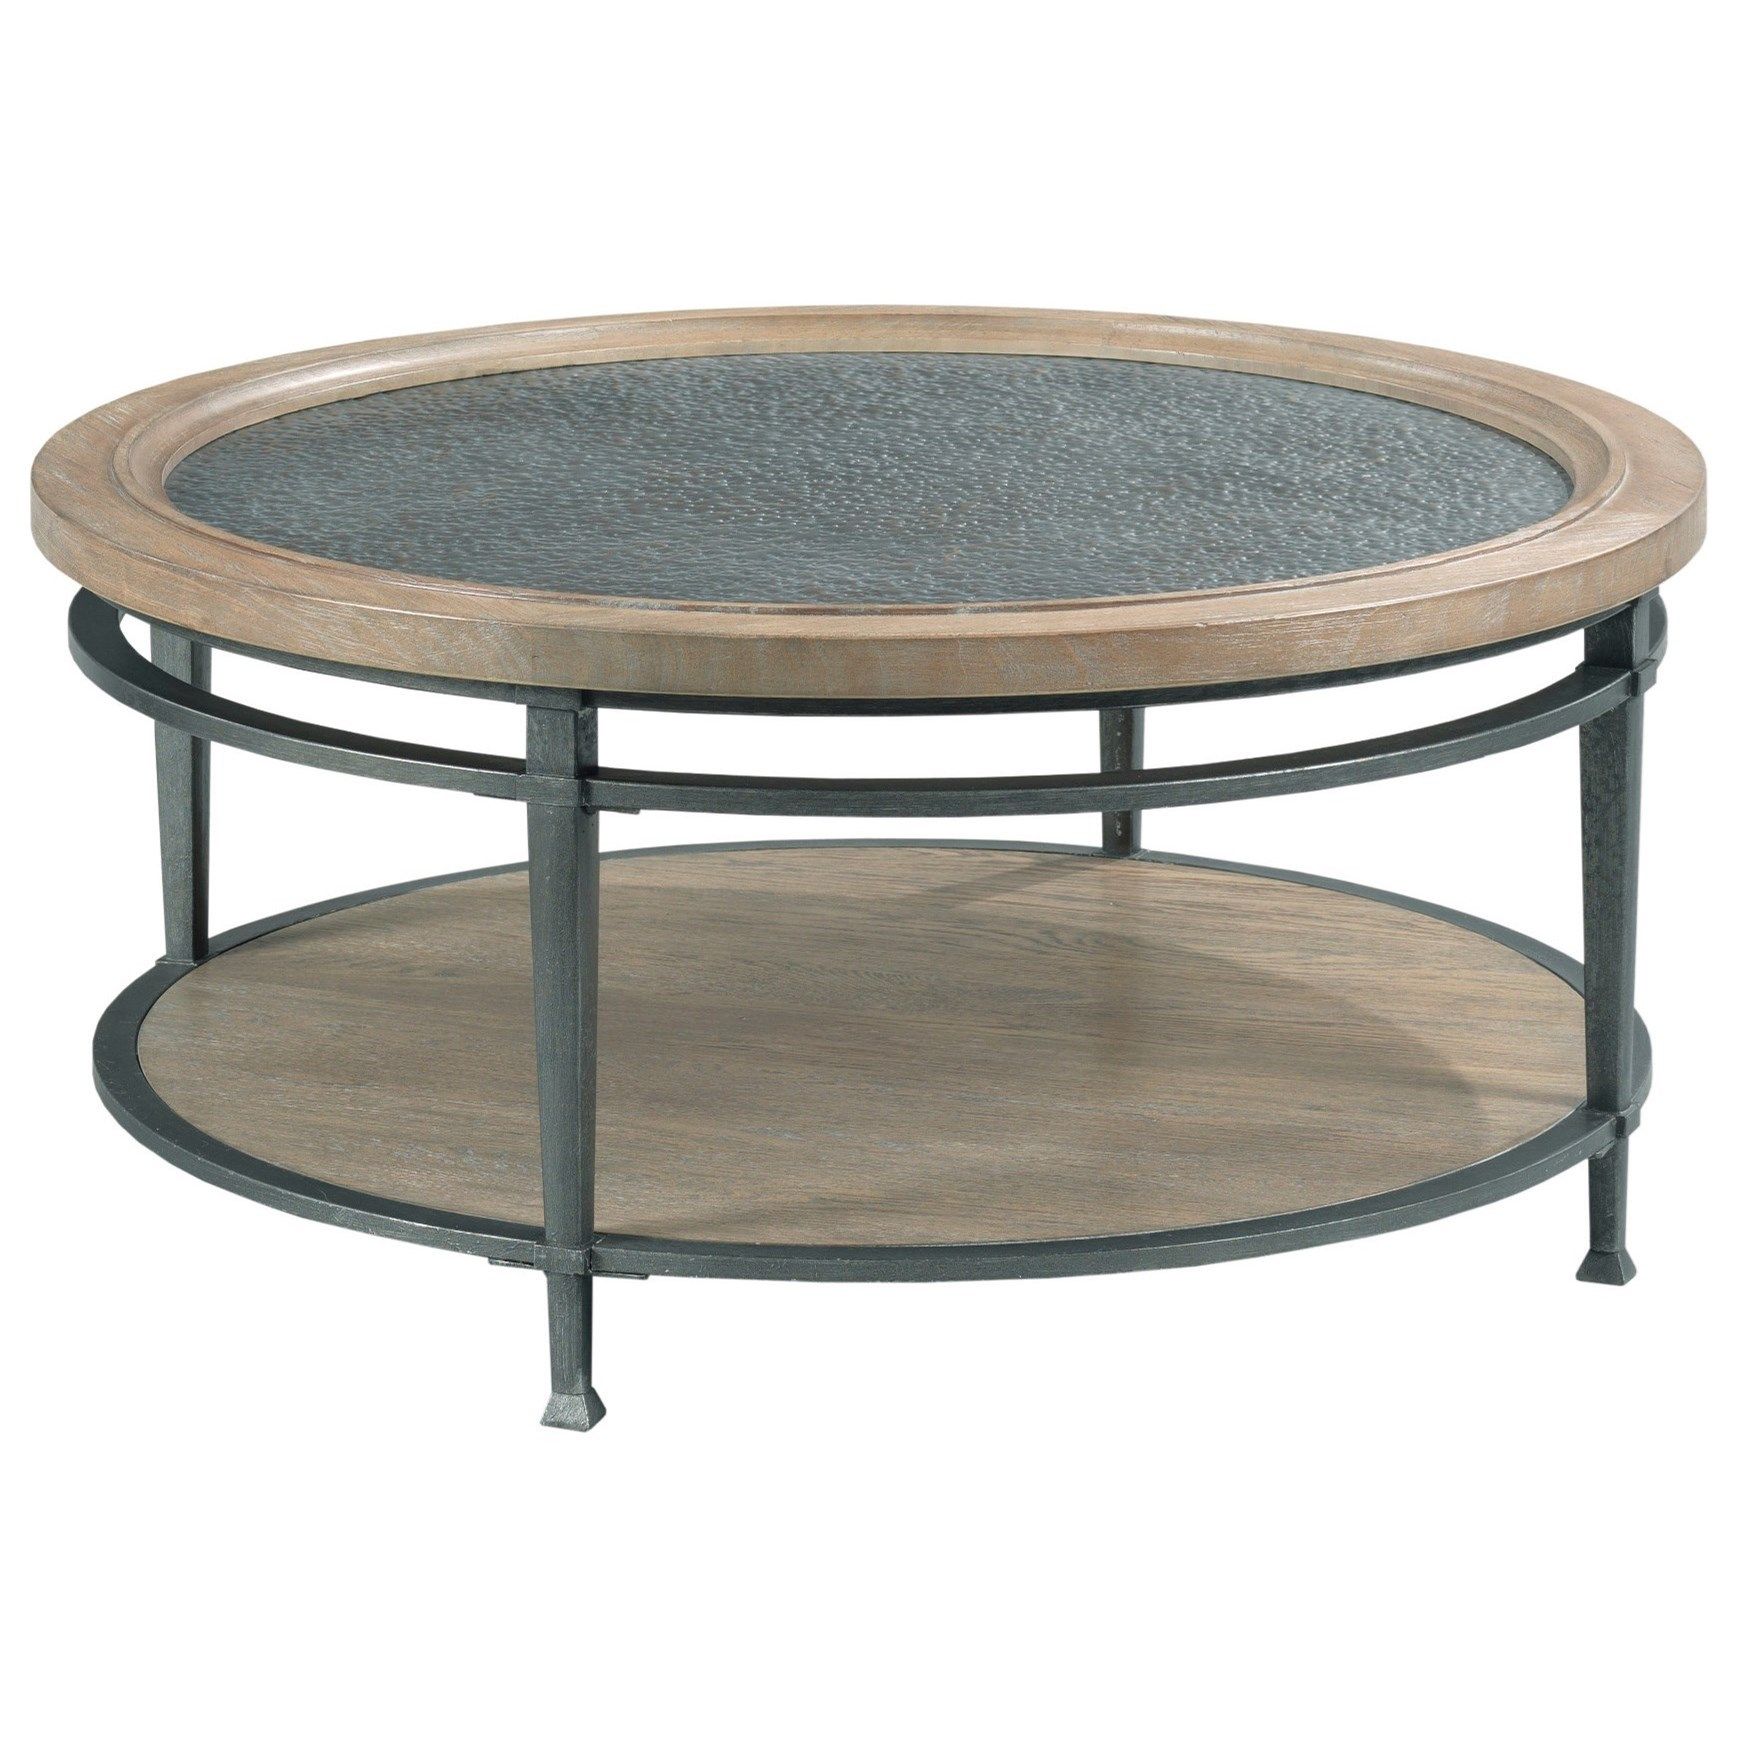 Hammary Austin Transitional Round Coffee Table | Wilson's Furniture Throughout American Heritage Round Coffee Tables (View 13 of 15)